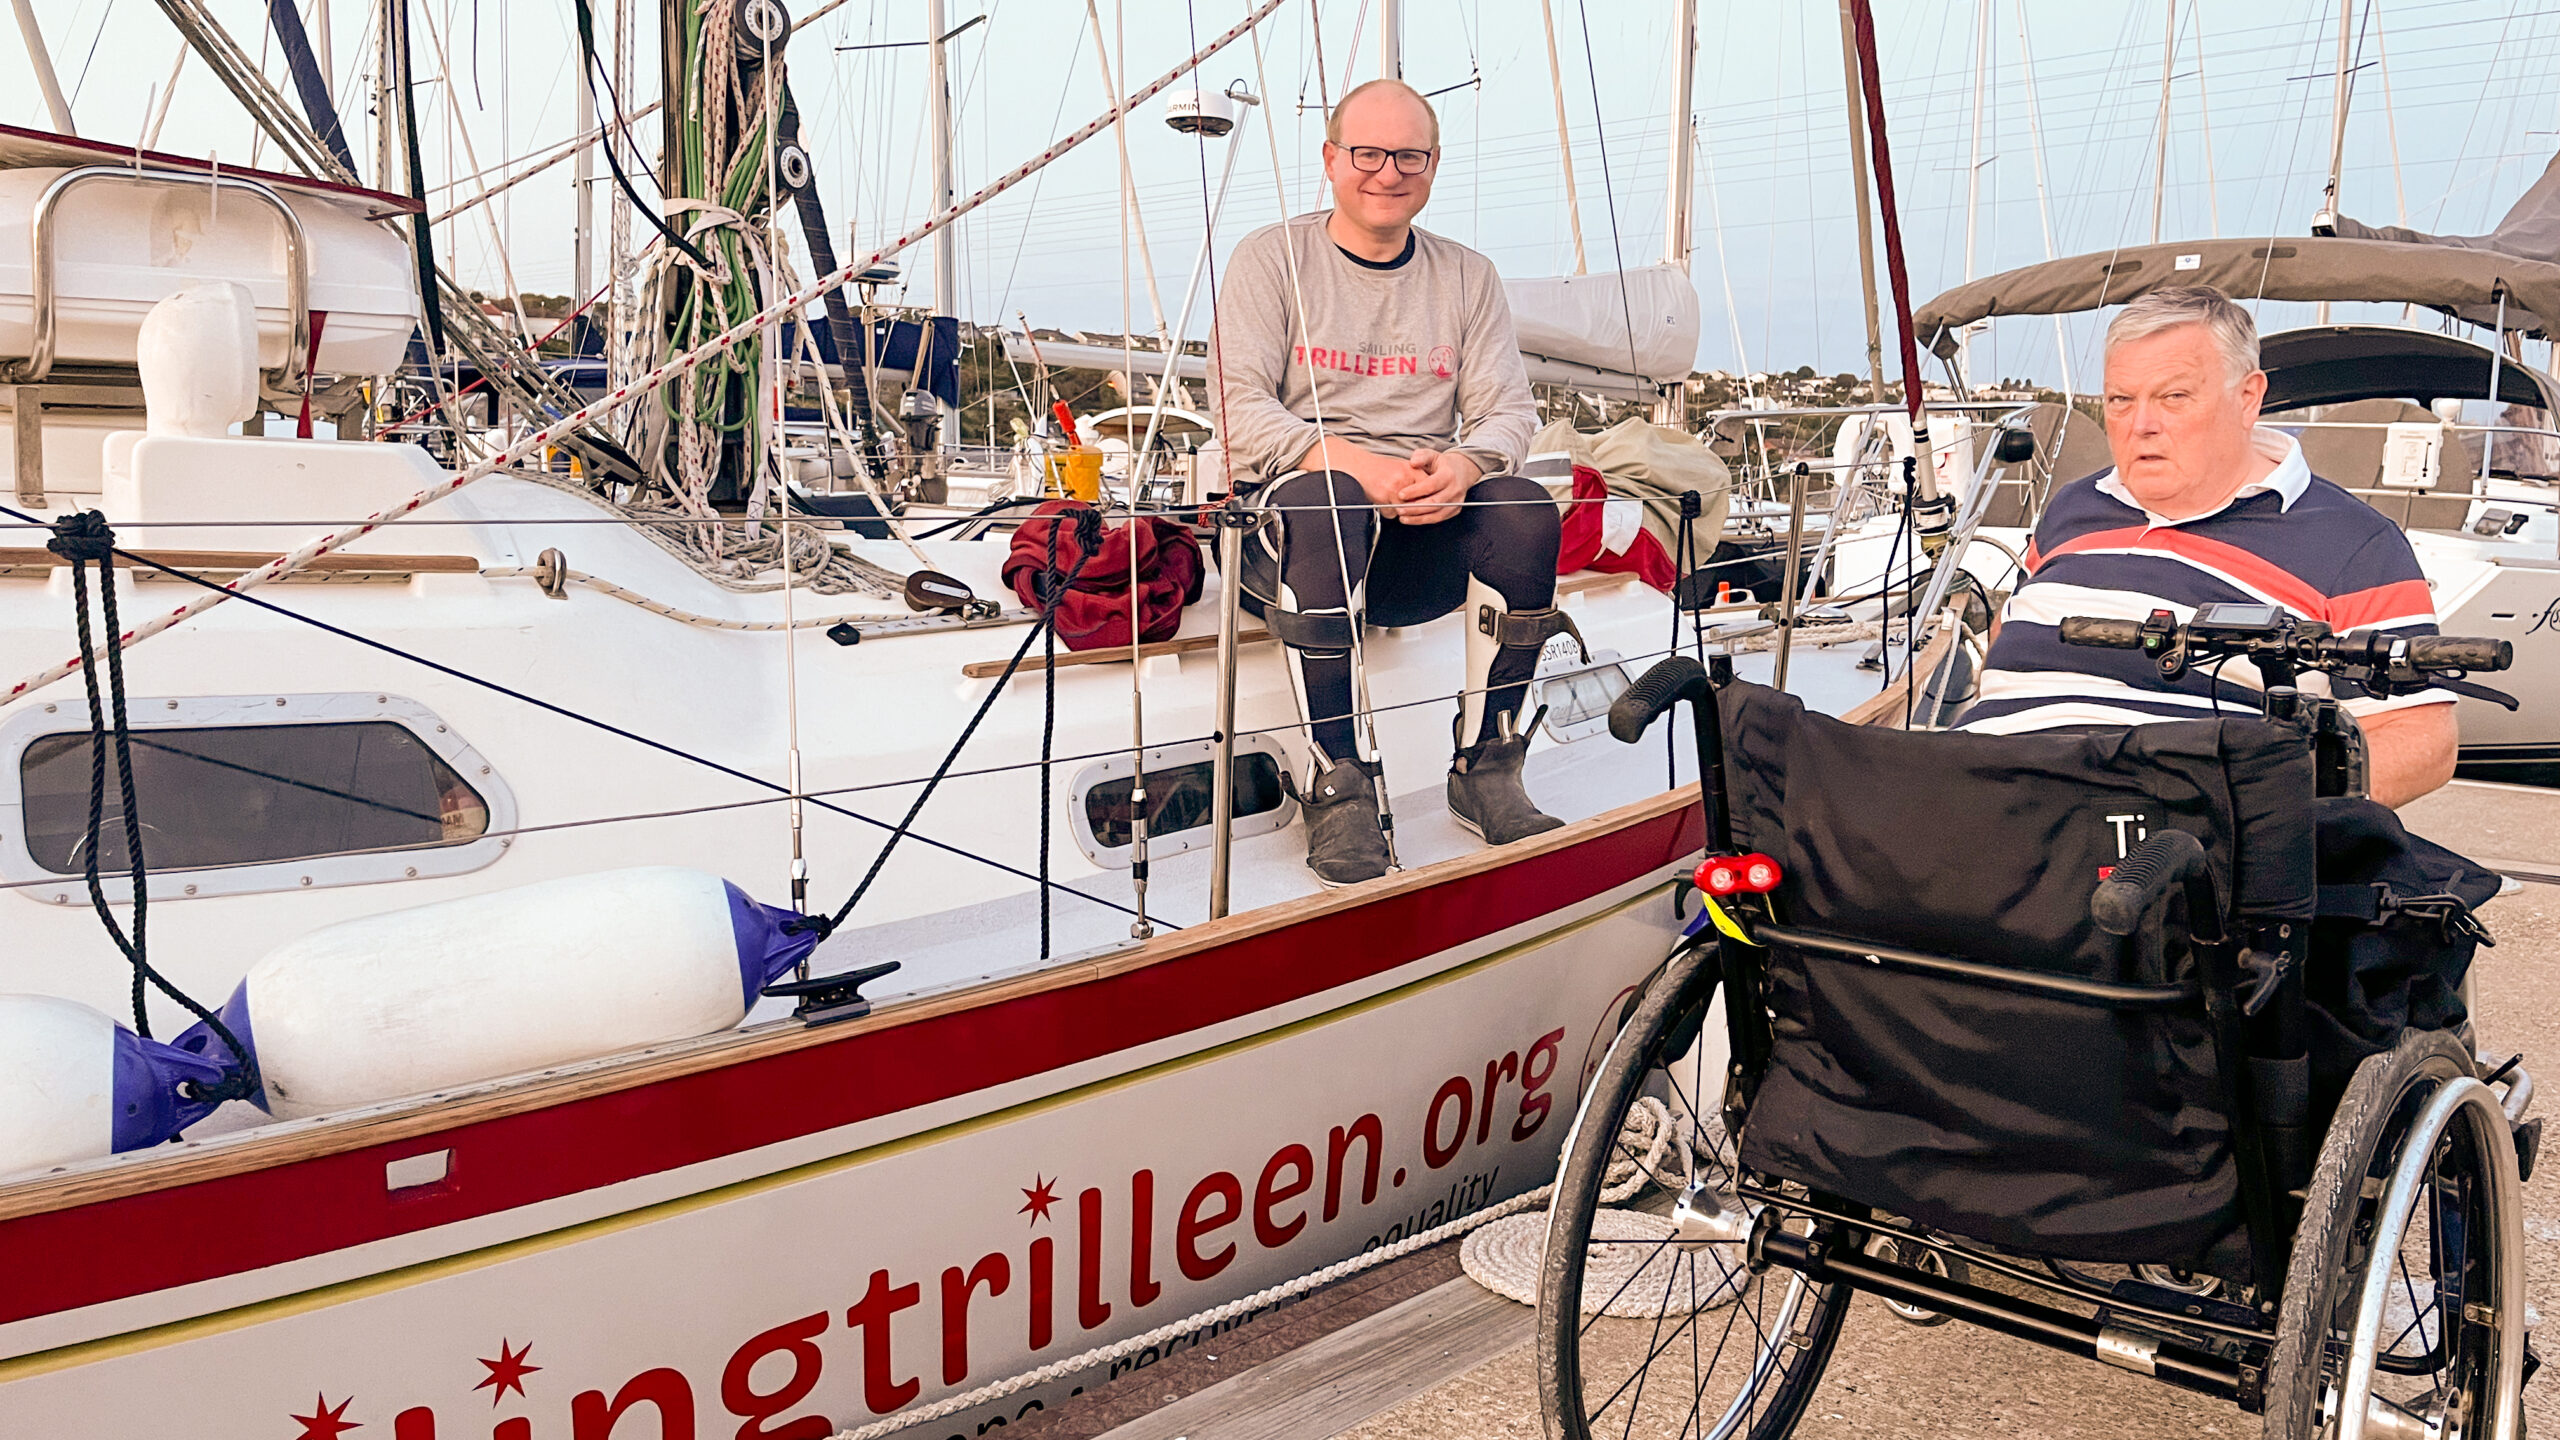 Creating a more inclusive sailing community in the UK